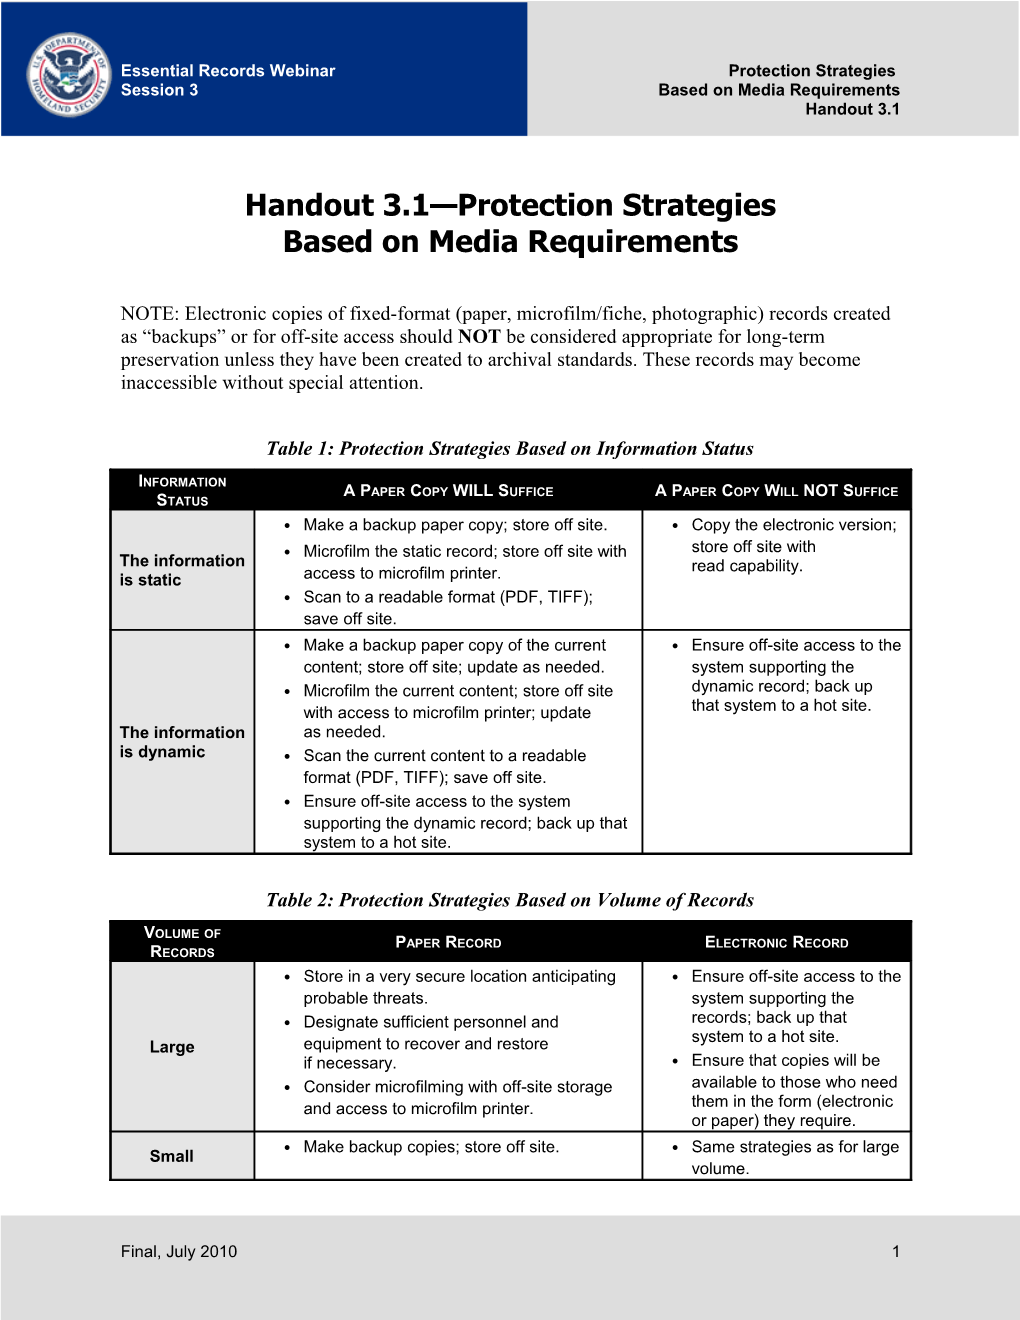 Handout 3.1 Protection Strategies Based on Media Requirements